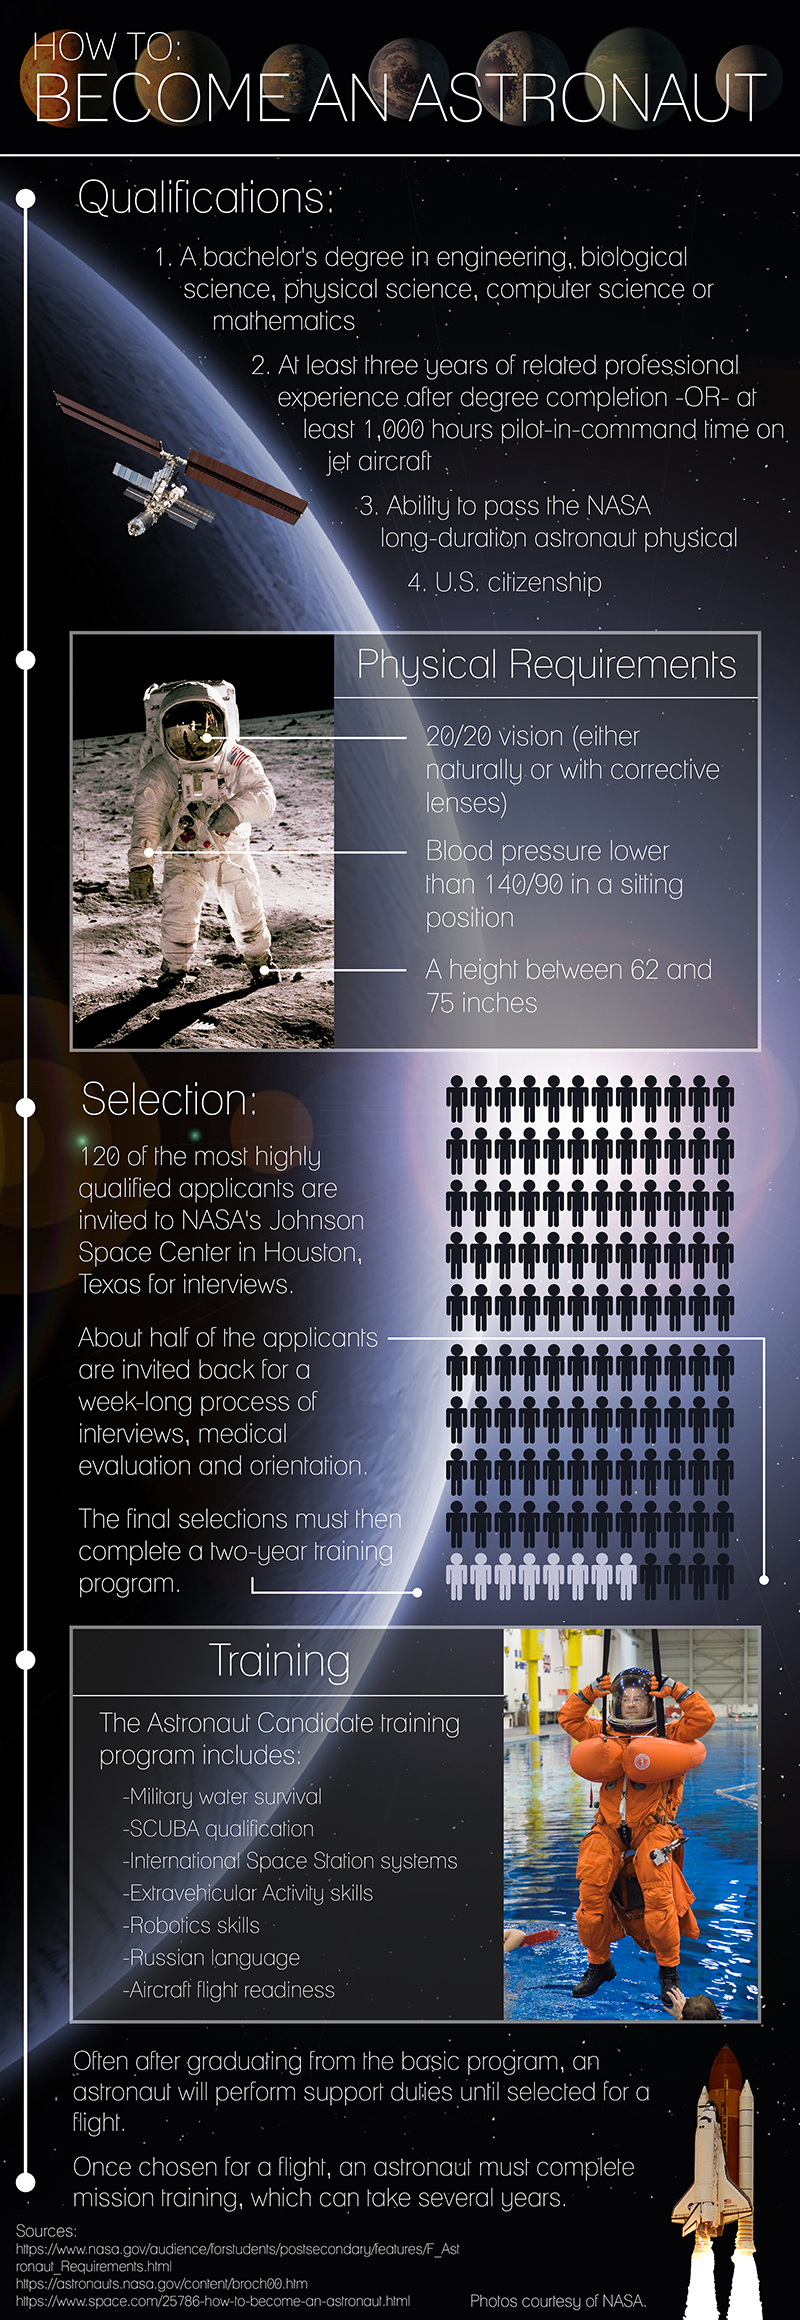 GRAPHIC: A guide to the steps to become an astronaut. Graphic created by The Signal online editor, Krista Kamp.